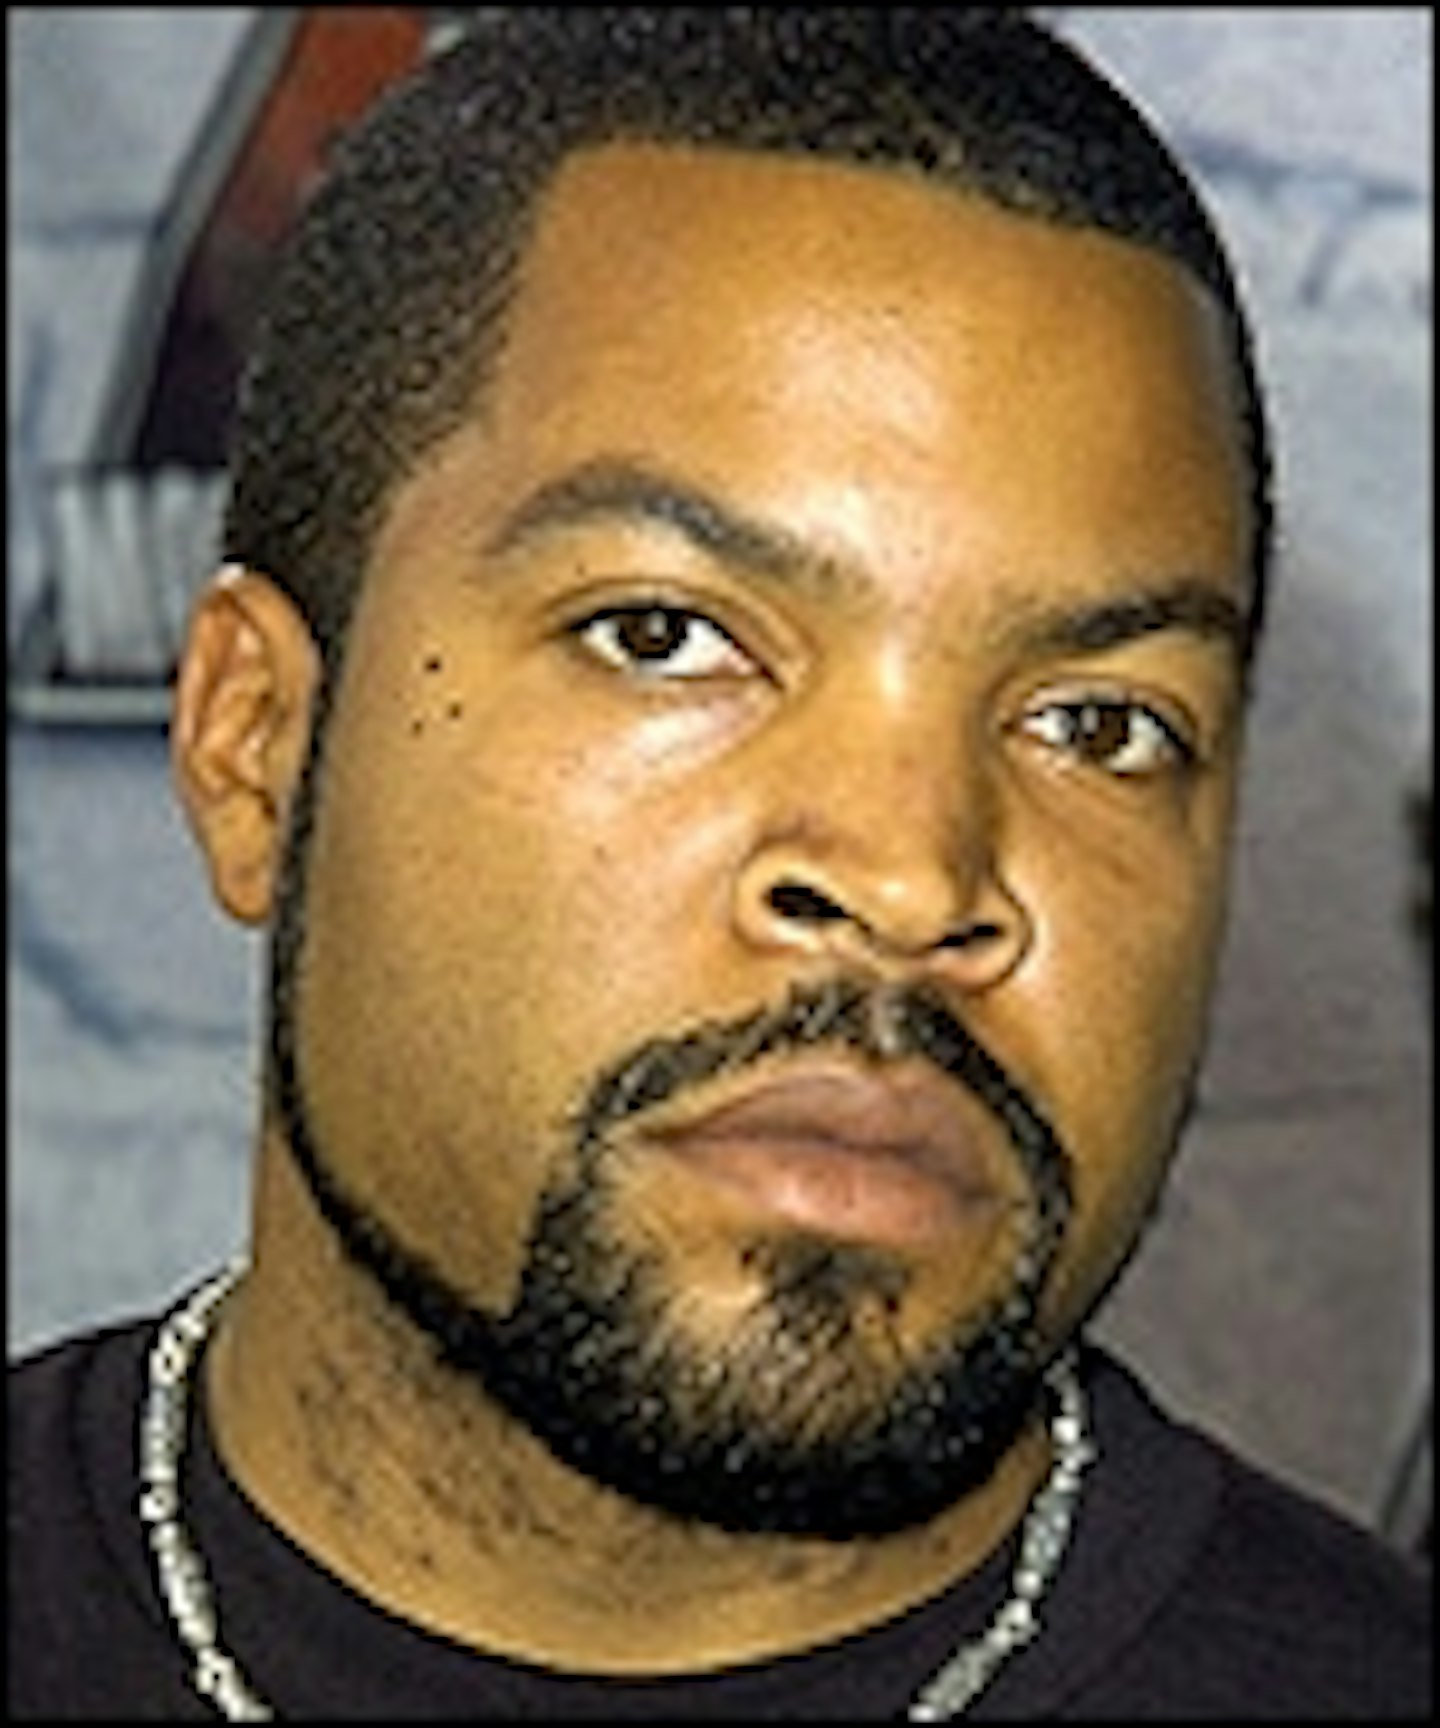 Ice Cube Working With Chrome And Paint